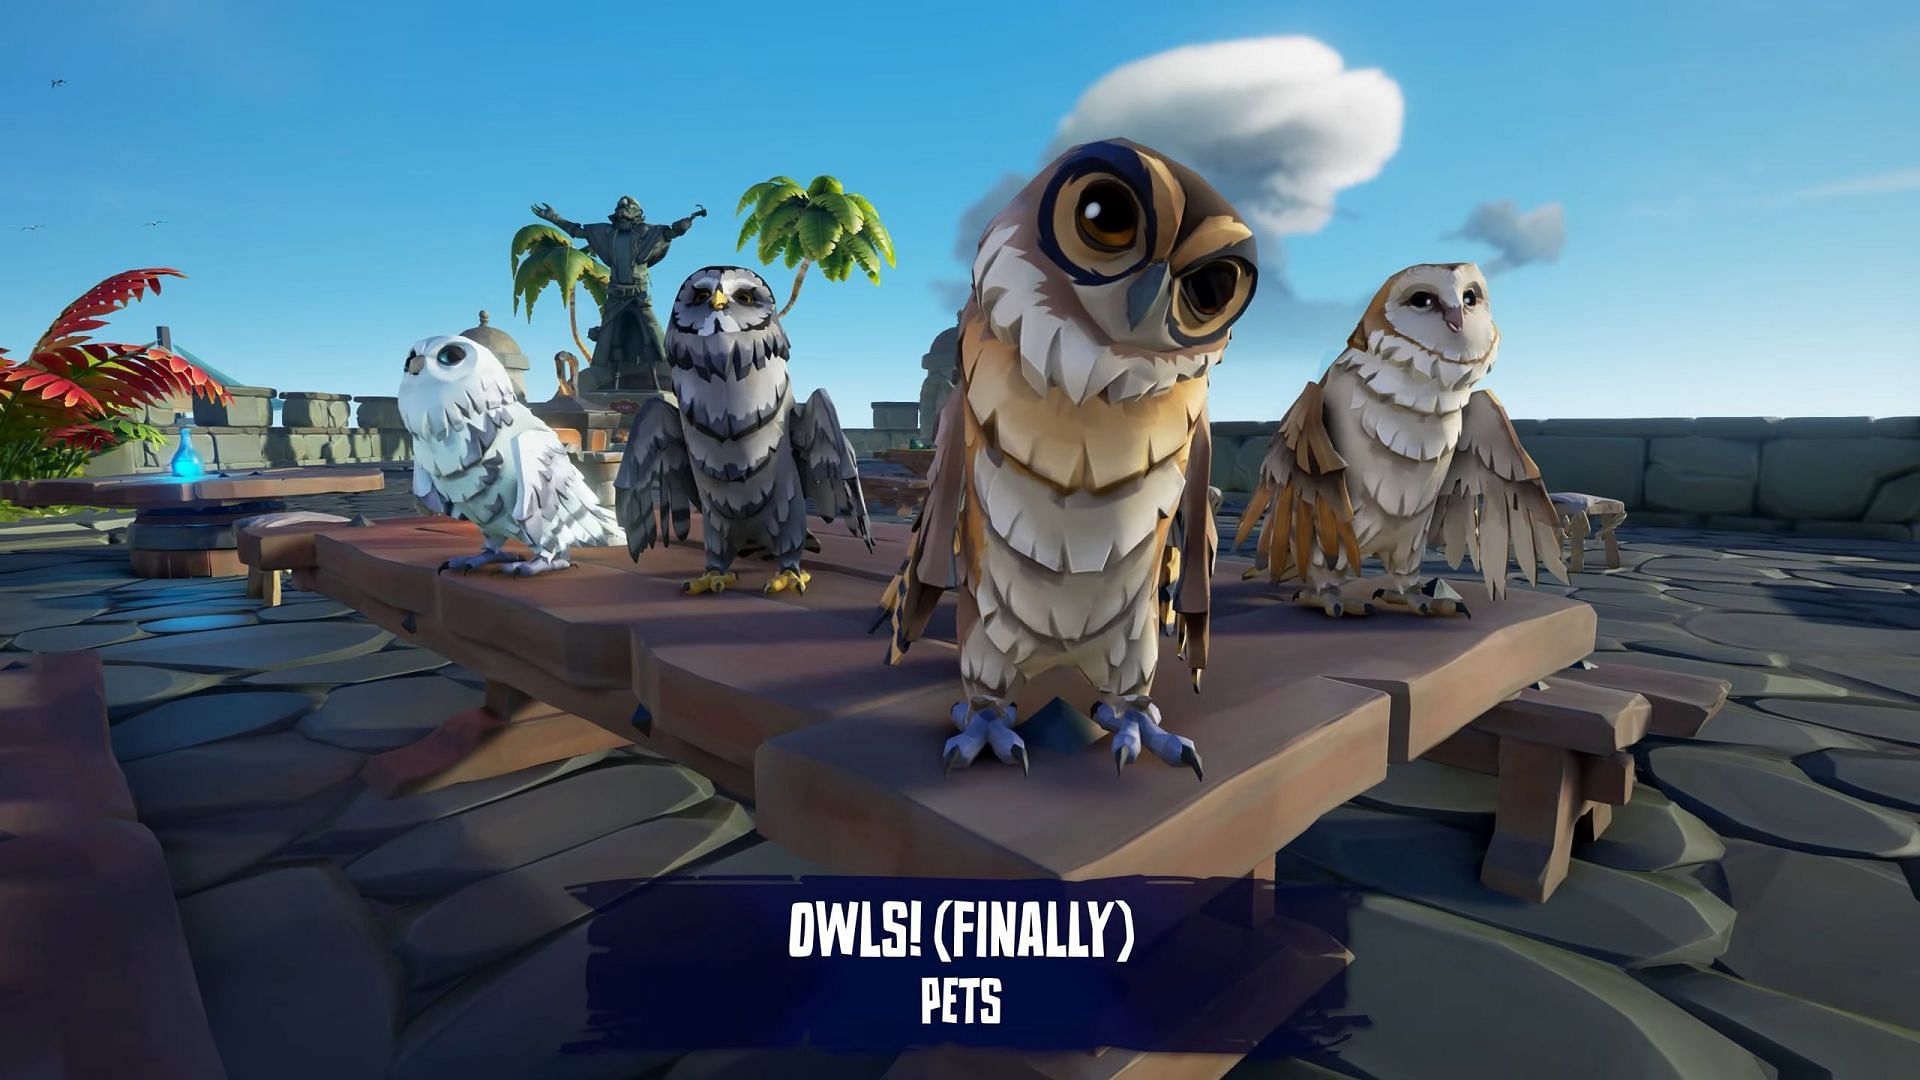 Owls are finally here in Sea of Thieves (Image via Rare)